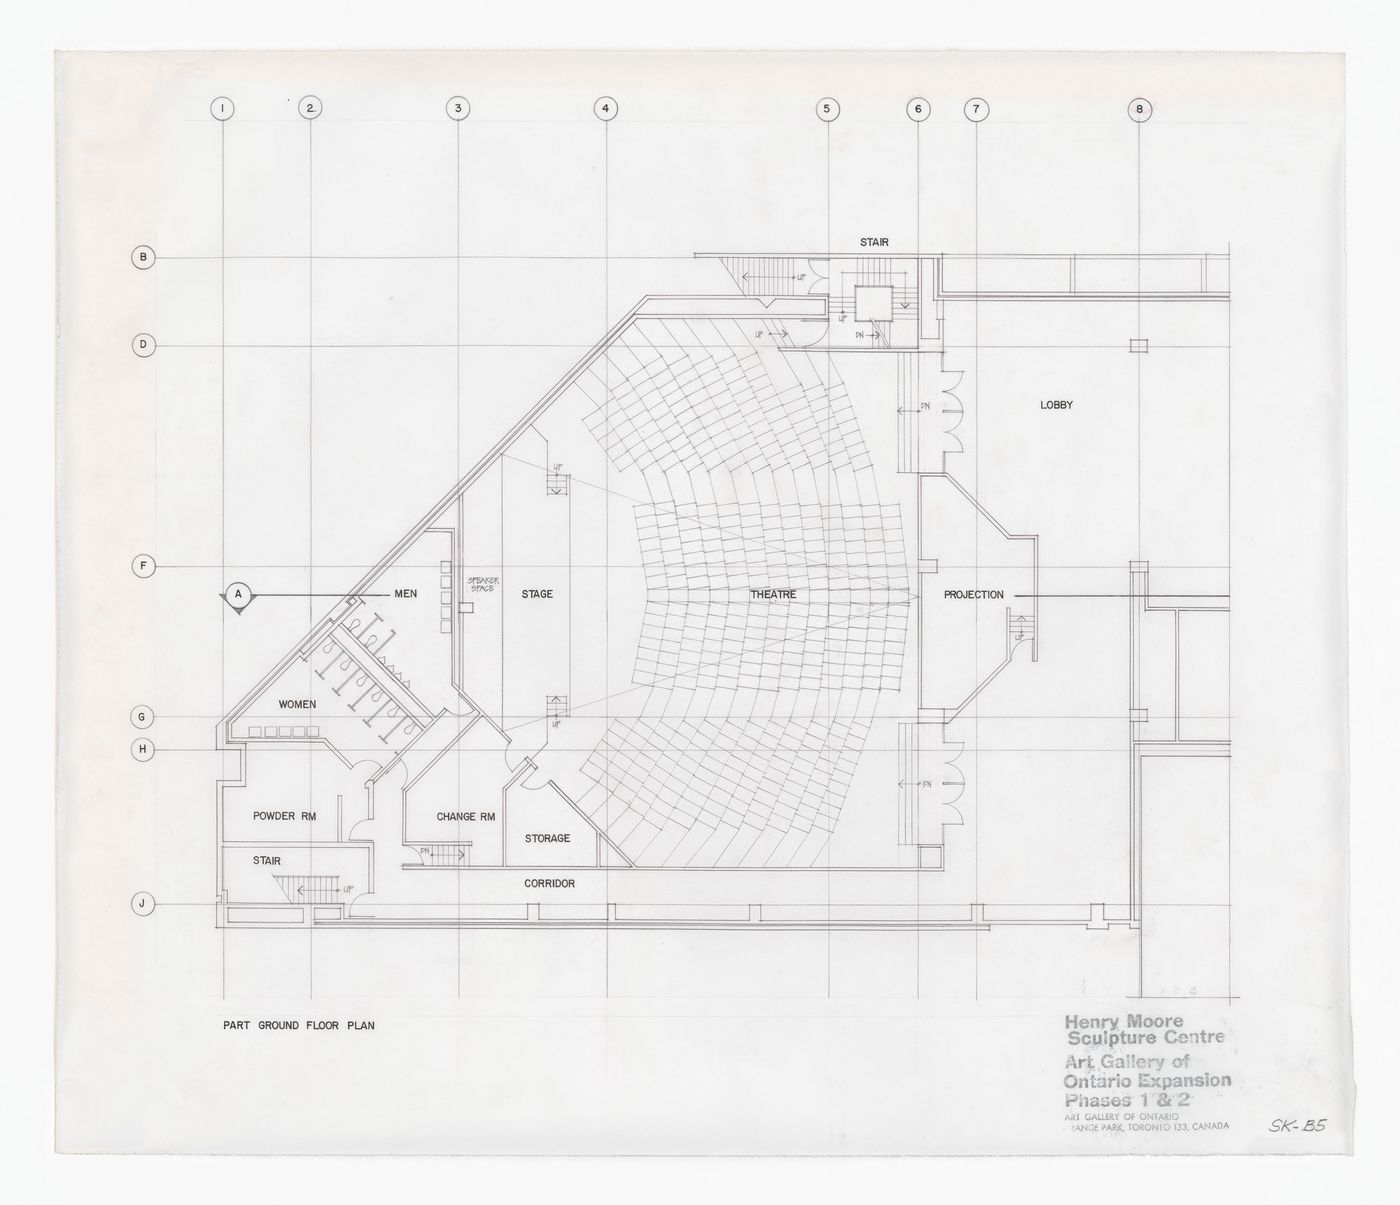 Theatre ground floor plan for Henry Moore Sculpture Centre, Art Gallery of Ontario, Stage I Expansion, Toronto